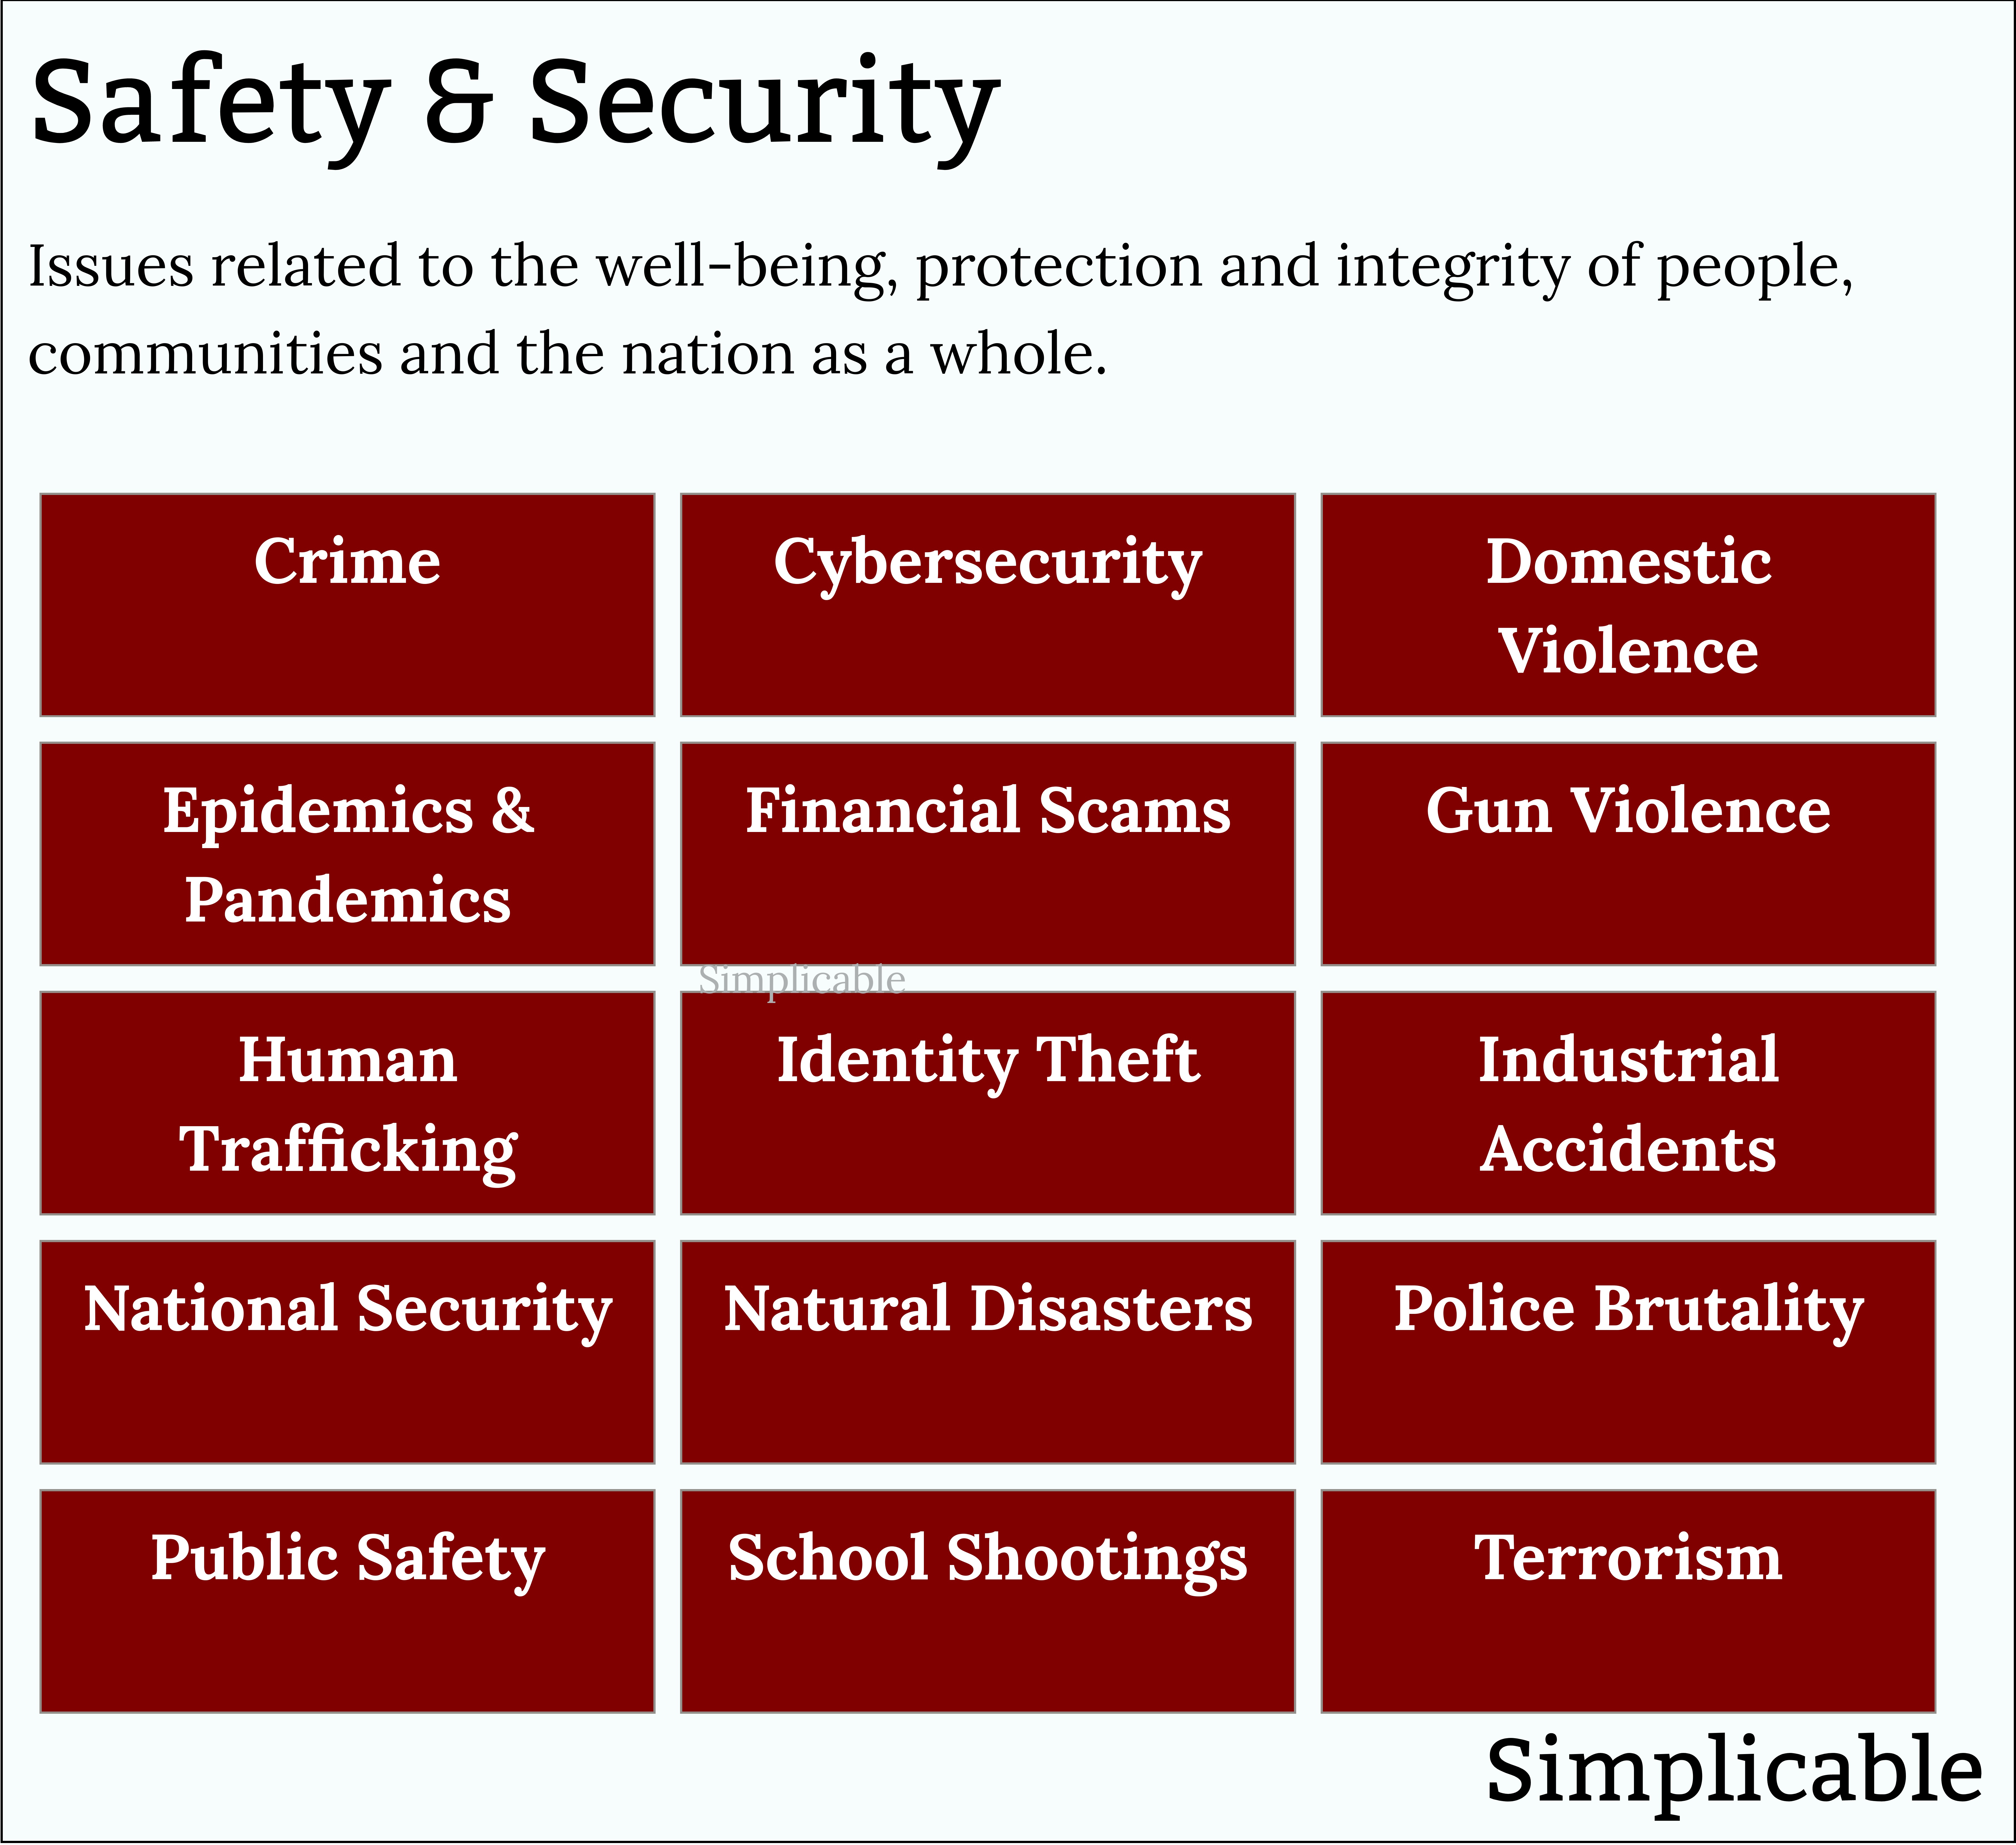 safety and security issues in the United States